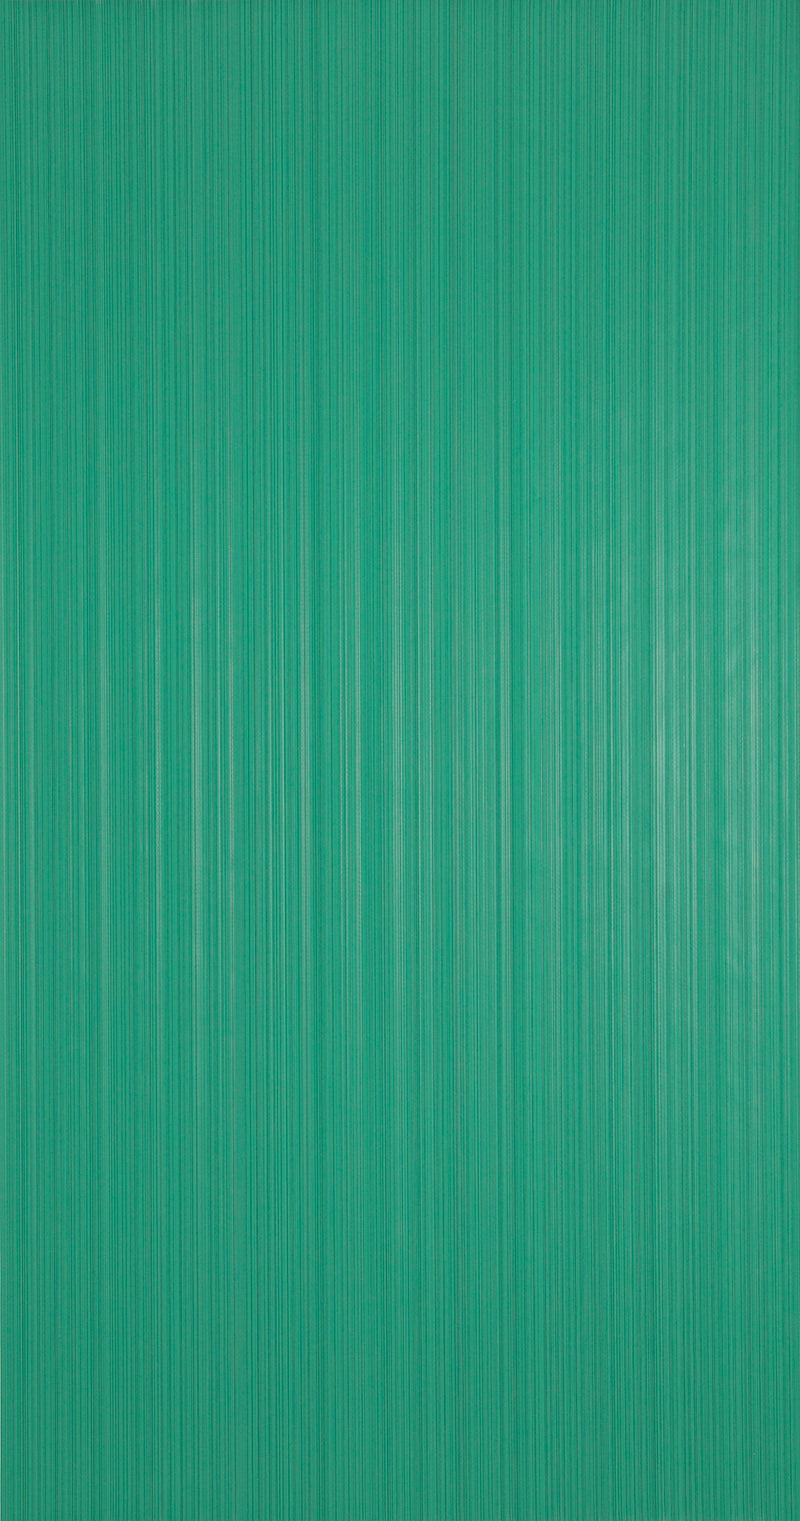 Green Textured Wallpaper C7202 | Commercial, Hospitality & Hotel Lobby